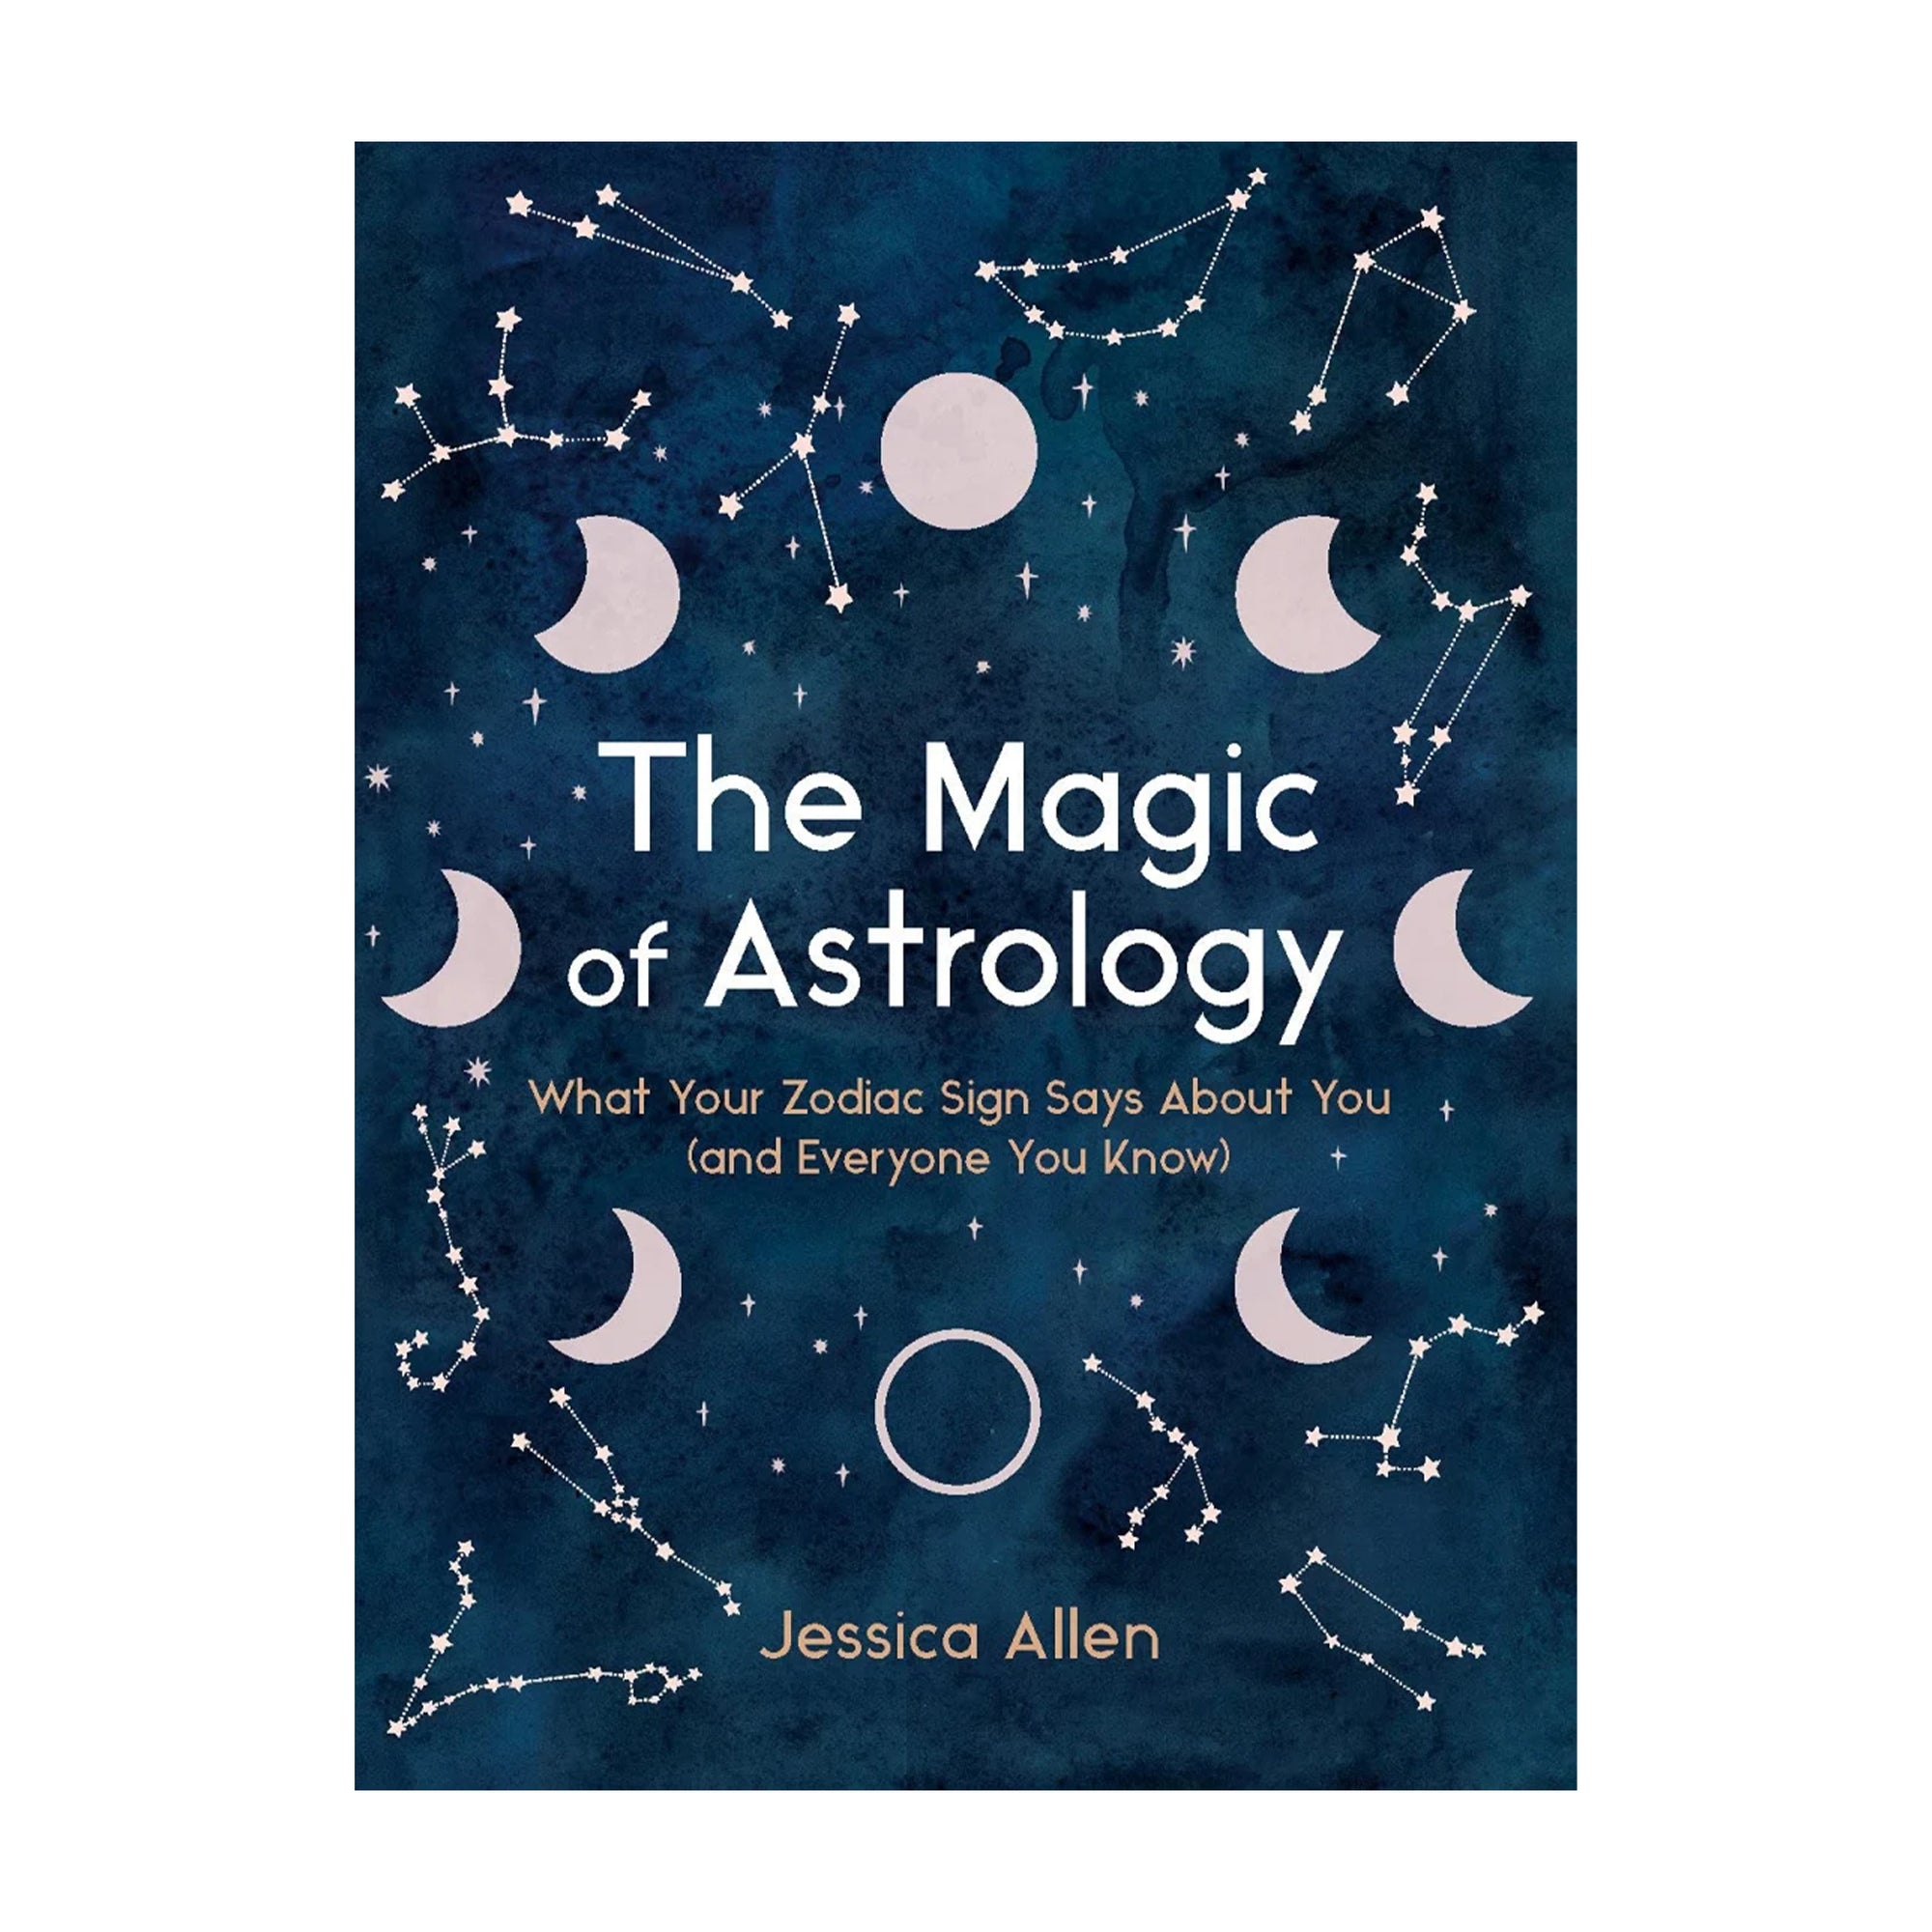 The Magic of Astrology